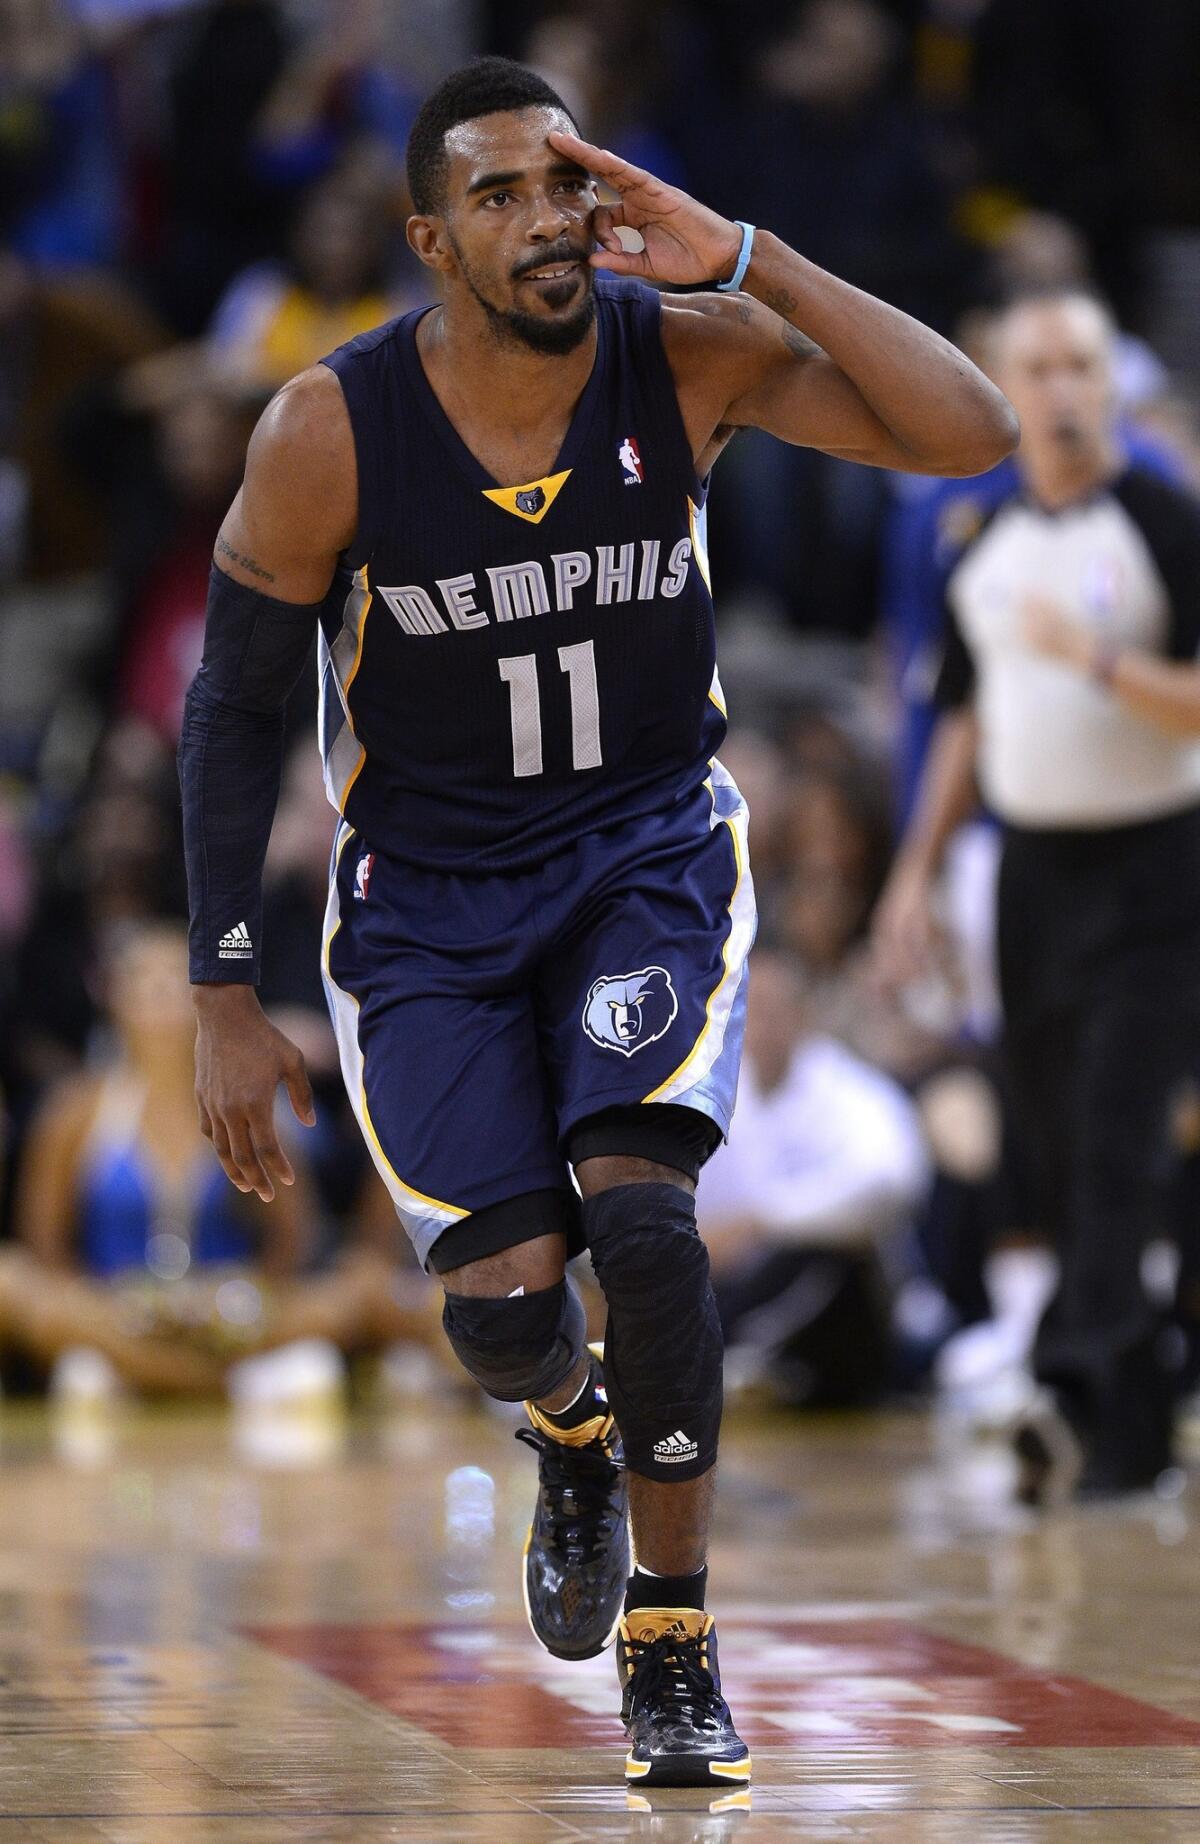 Memphis point guard Mike Conley reacts after hitting a three-pointer against the Golden State Warriors on Nov. 20.